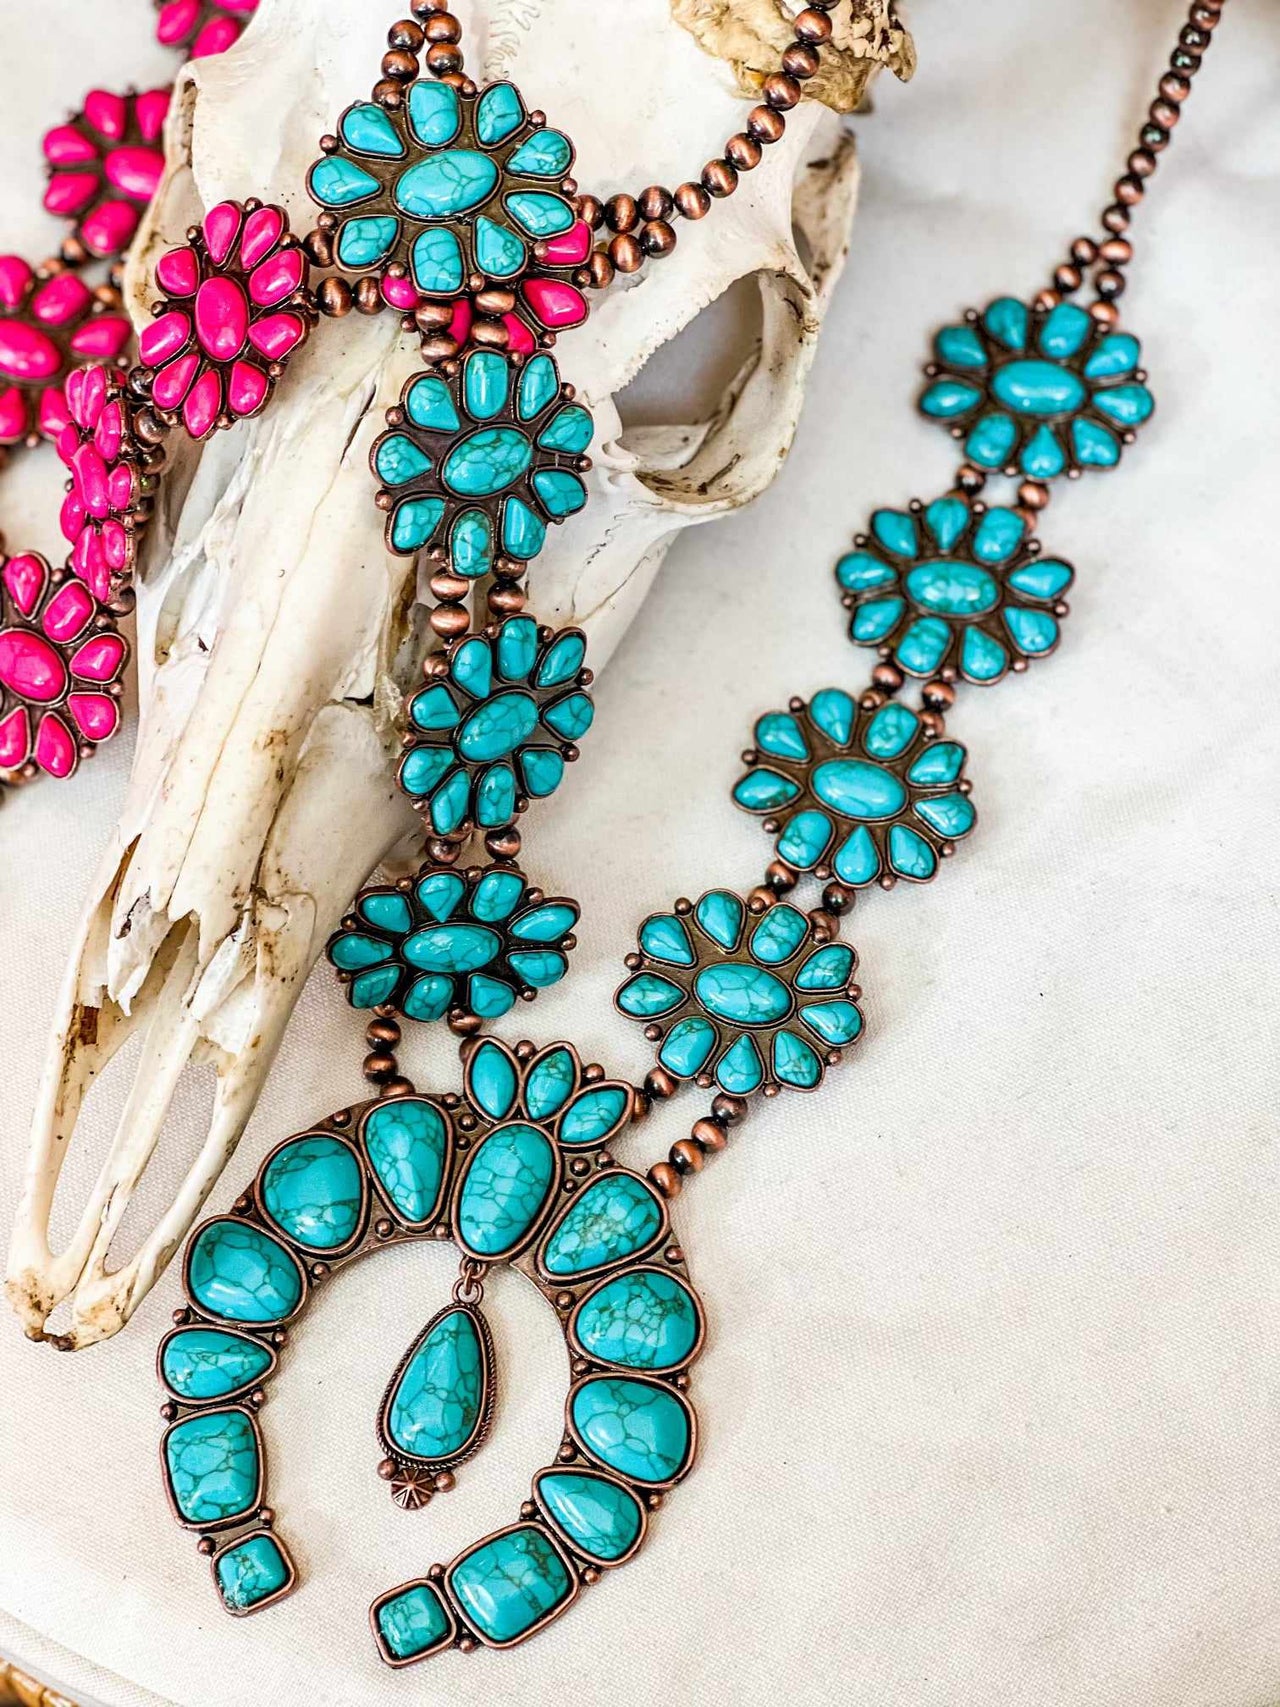 Western style Turquoise stone necklace with copper beads.